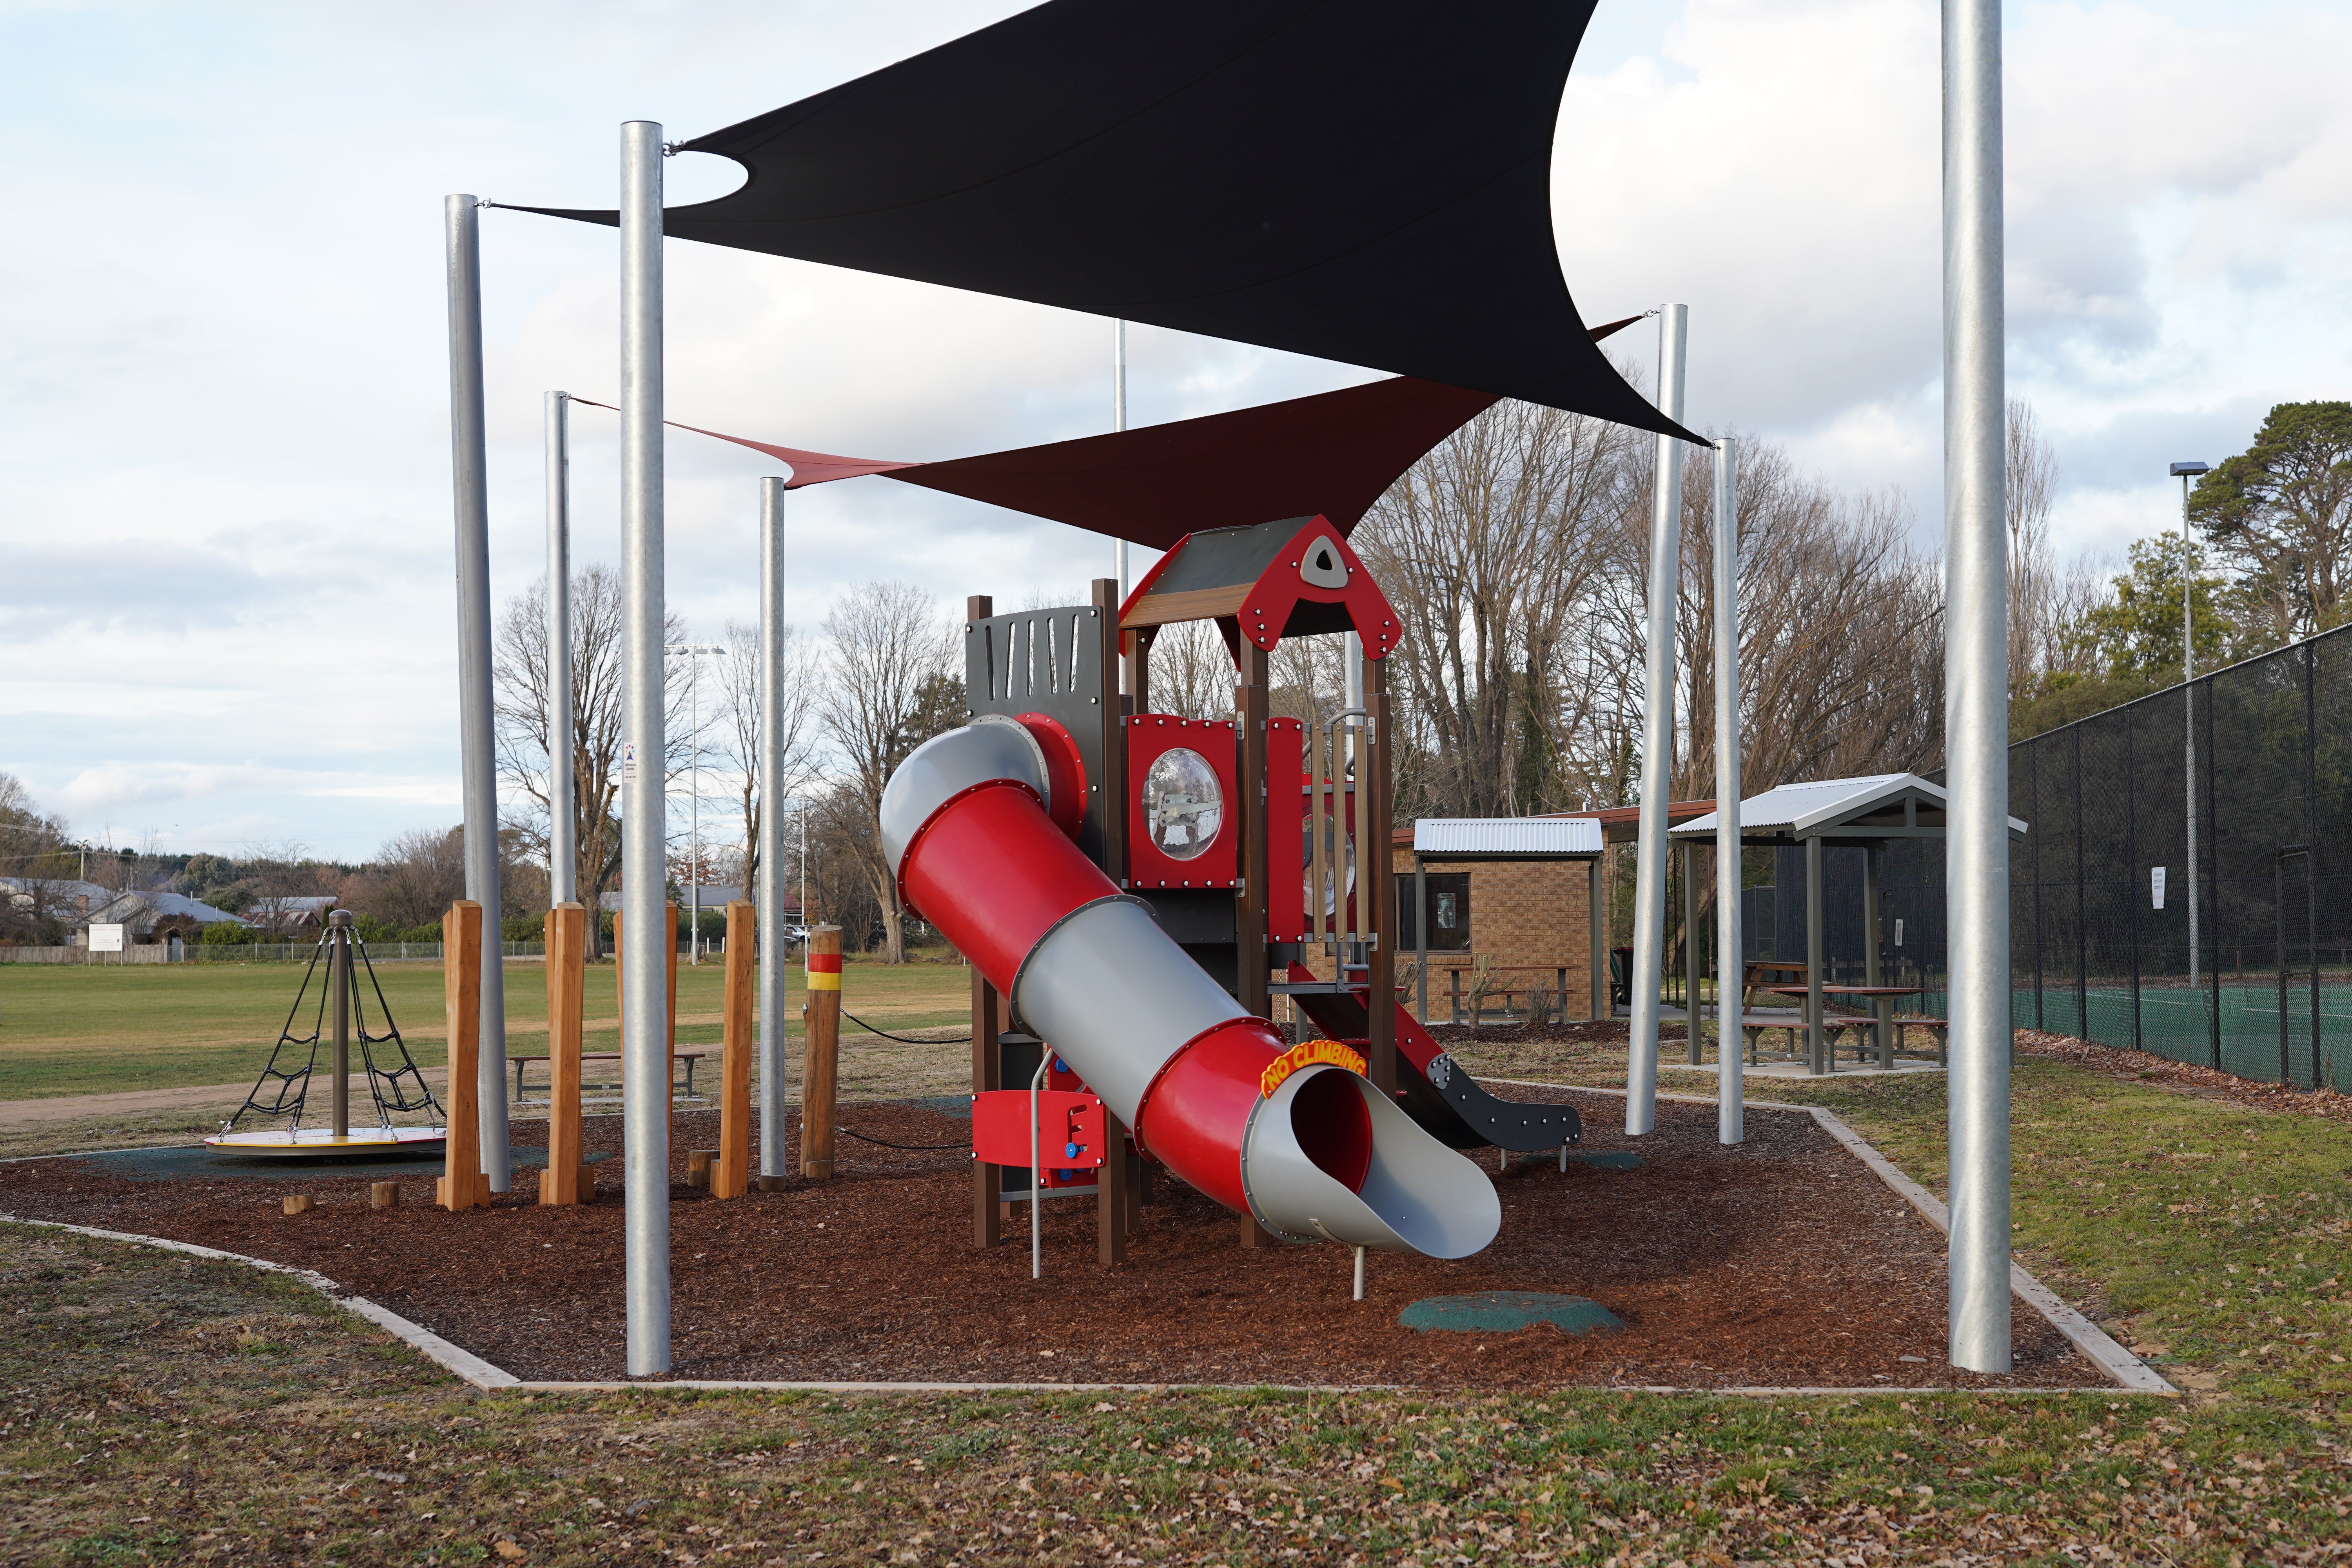 Braidwood Recreation Grounds and Playground - Accommodation Bookings